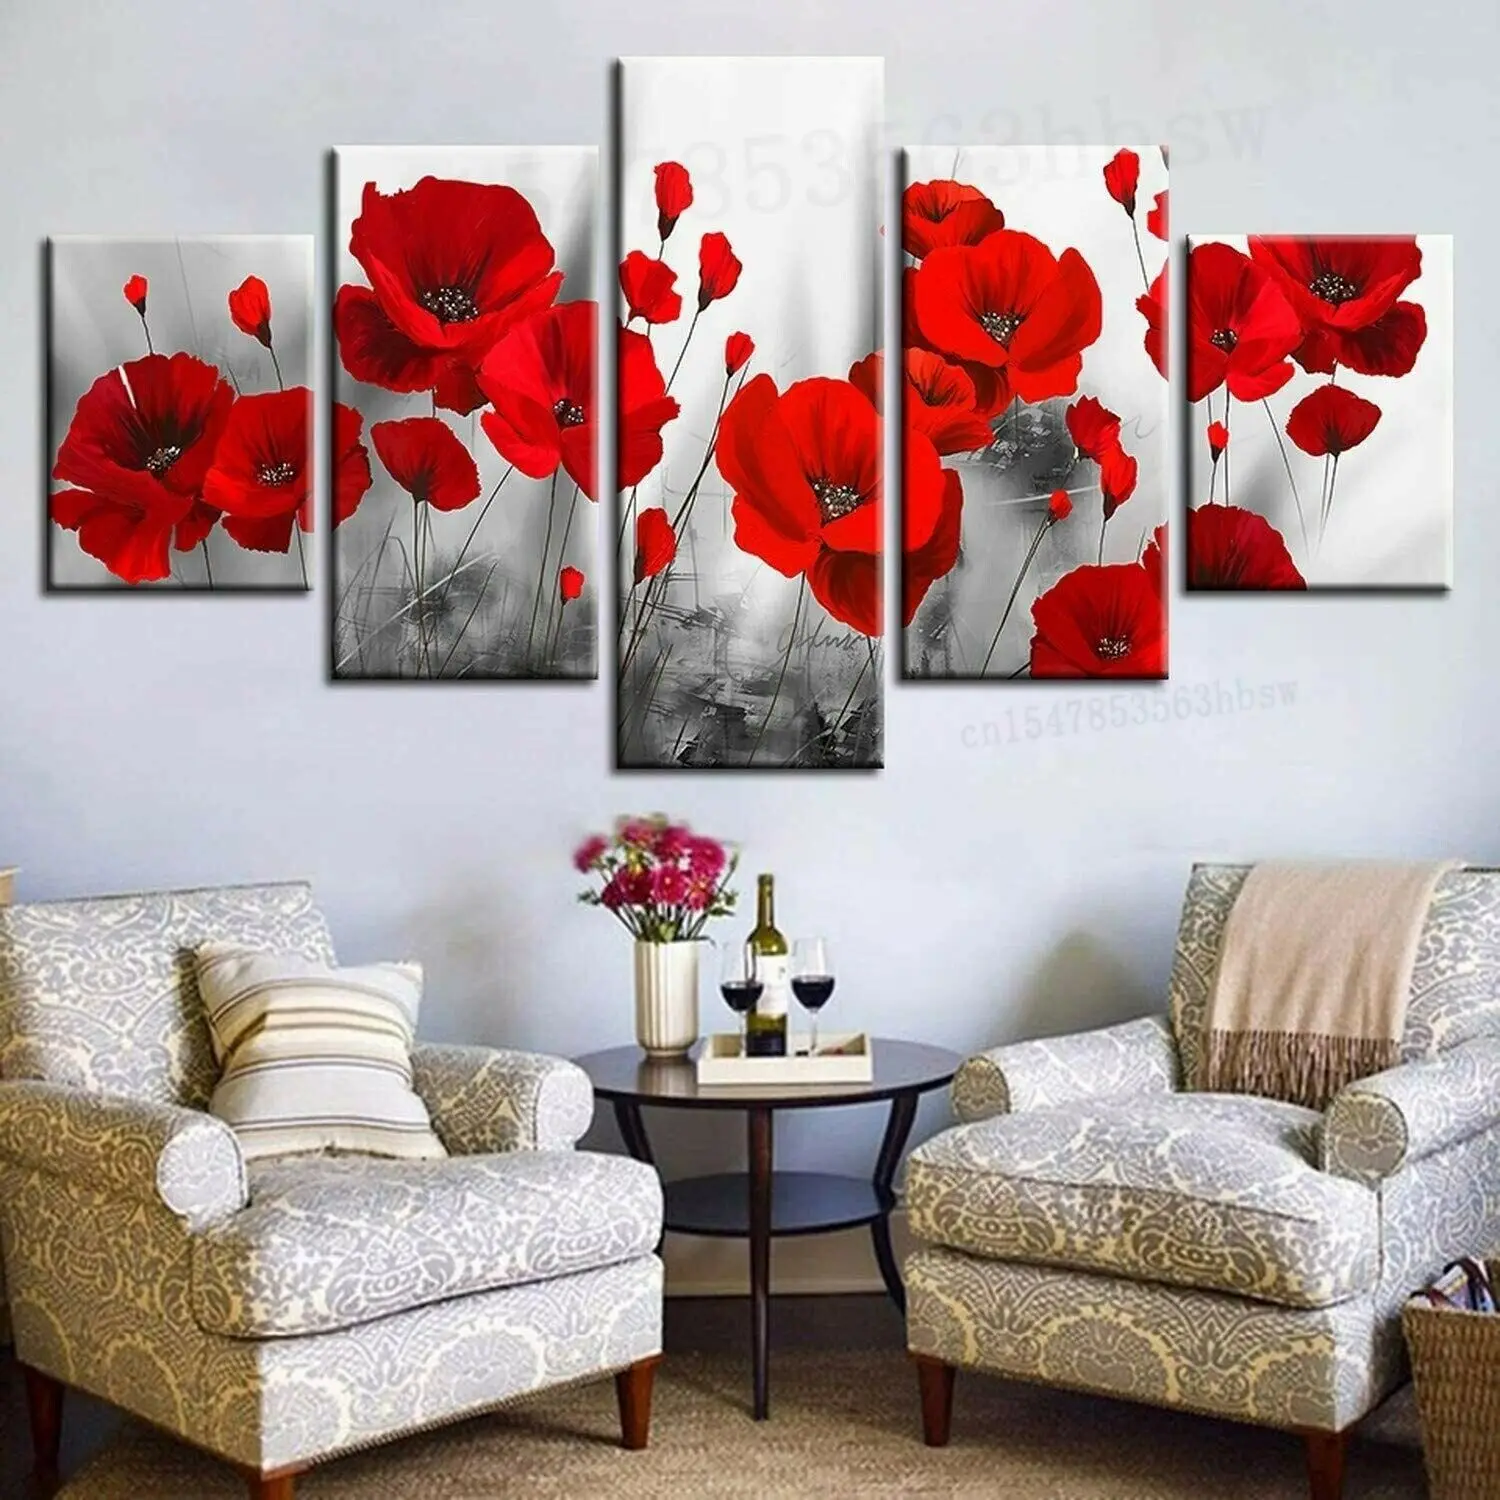 Red Poppy Flower Poppies 5 Piece Canvas Wall Art Poster Print Home Decor